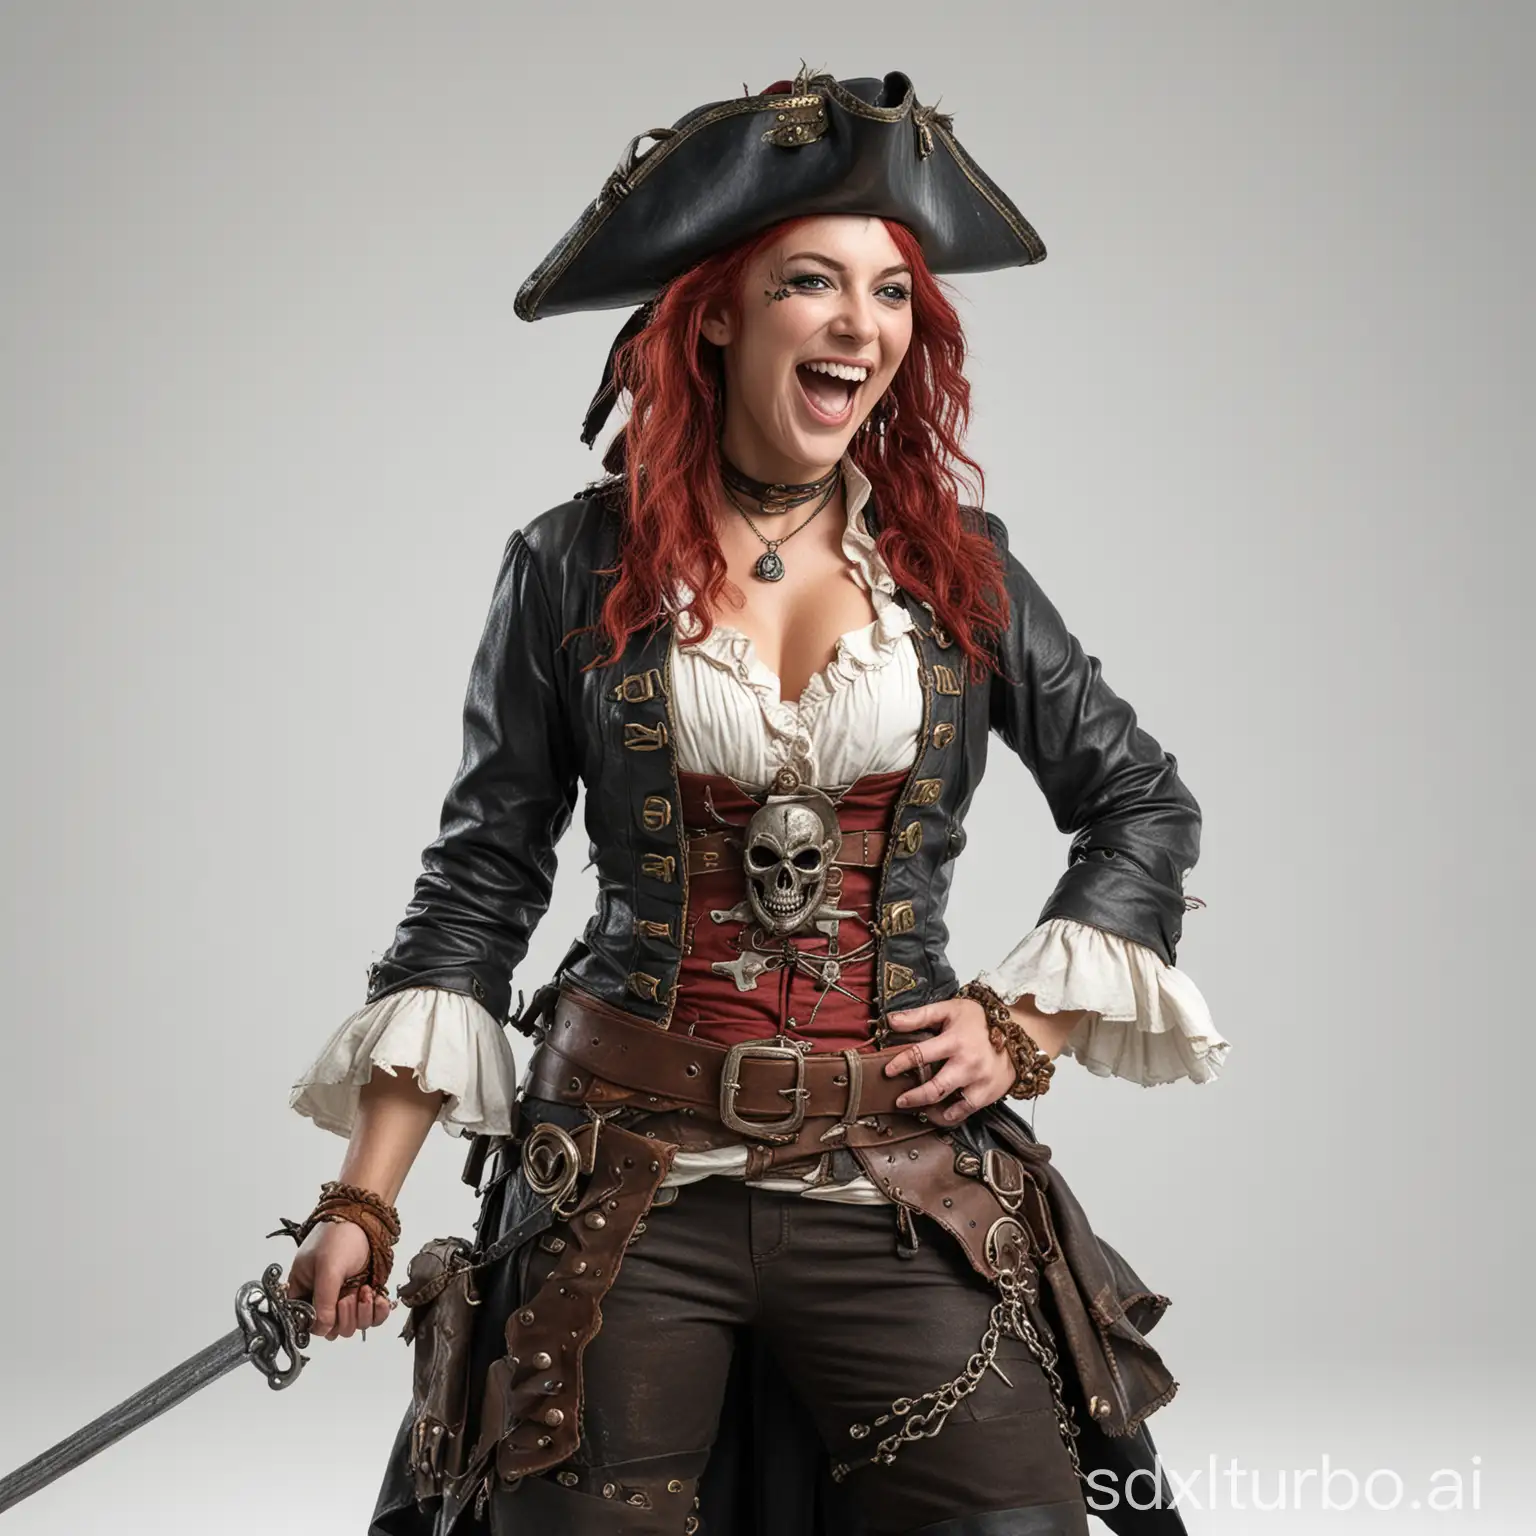 Laughing-Female-Pirate-Redd-in-High-Resolution-Portrait-on-Plain-White-Background